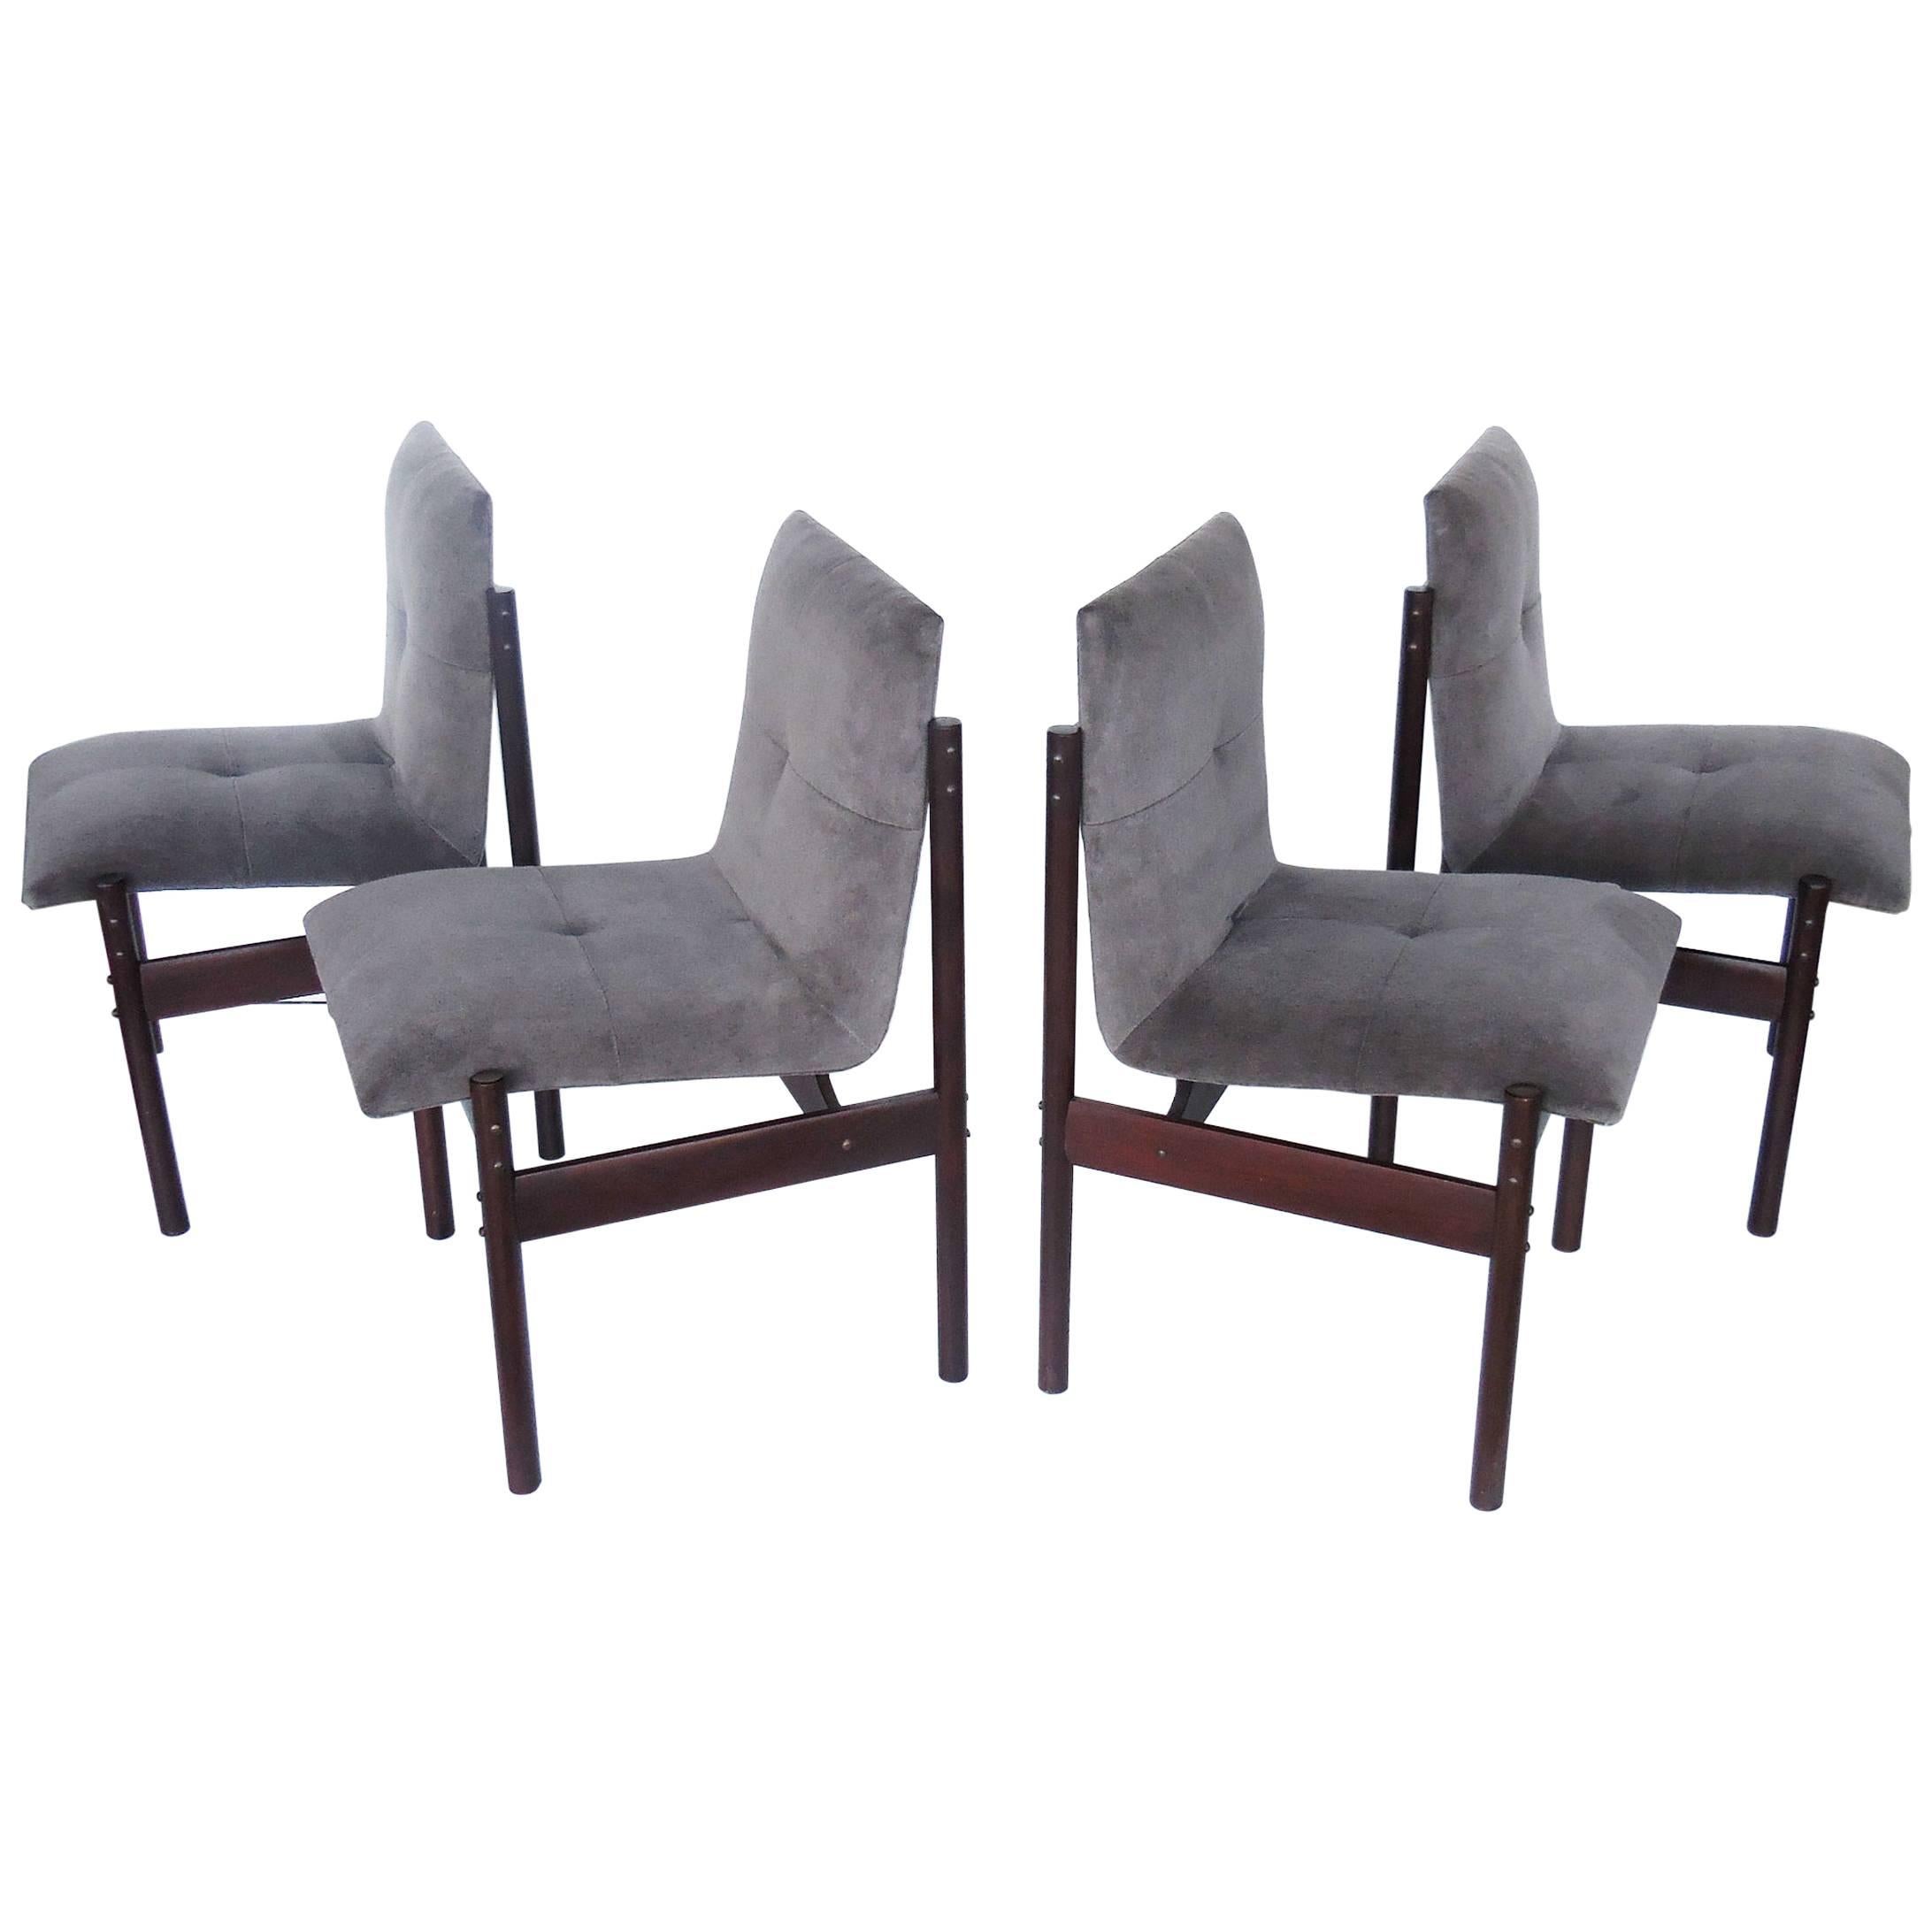 Four Rosewood Dining Chairs by Celina Moveis, Brazil 1960s